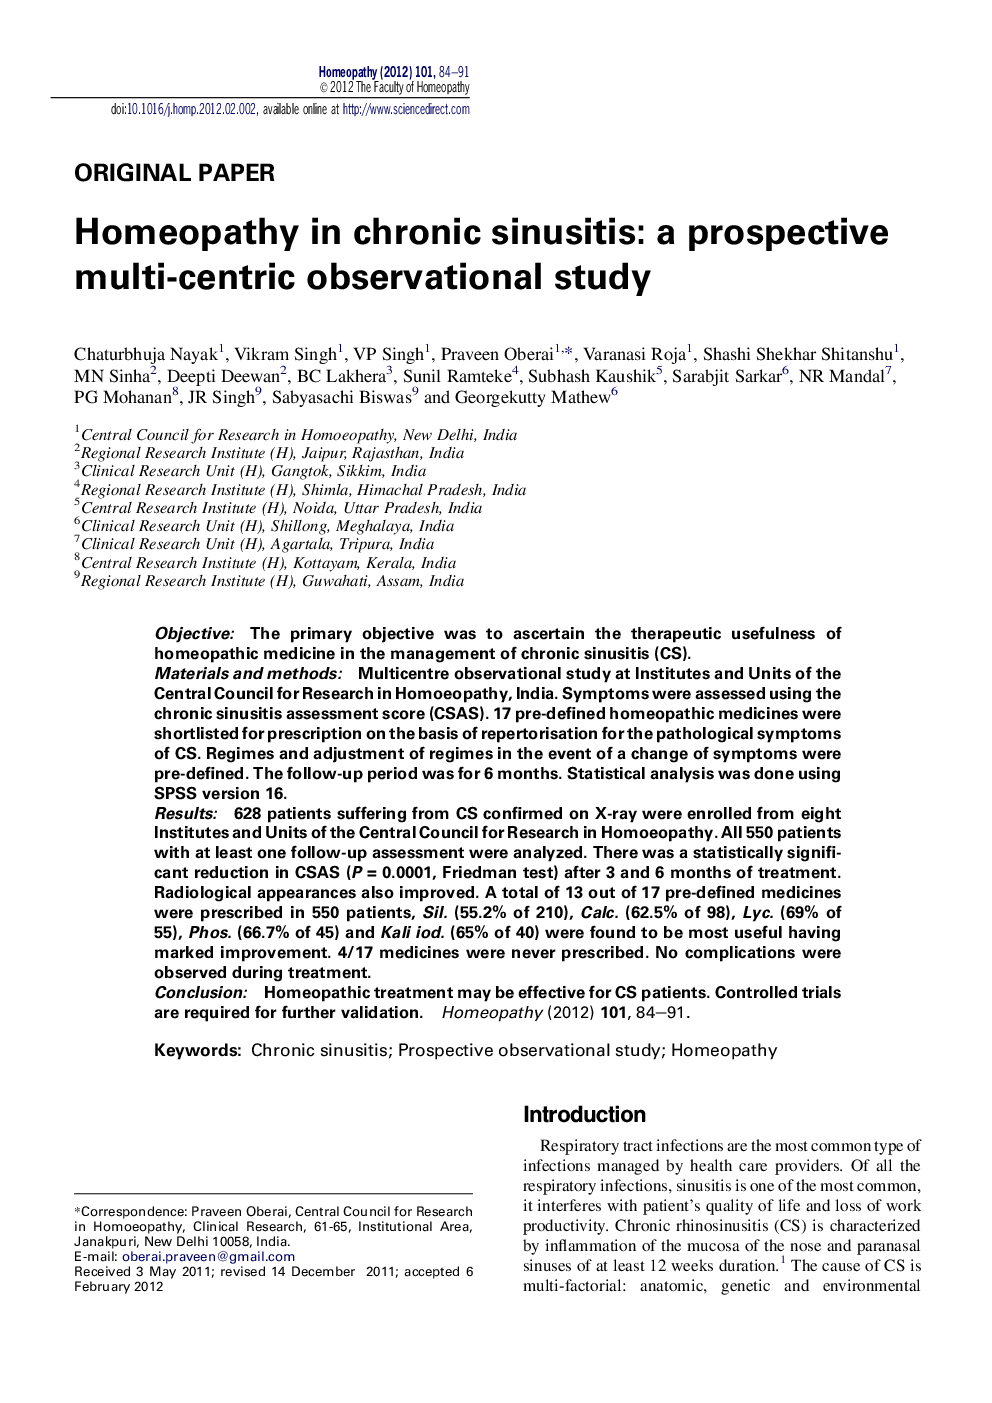 Homeopathy in chronic sinusitis: a prospective multi-centric observational study